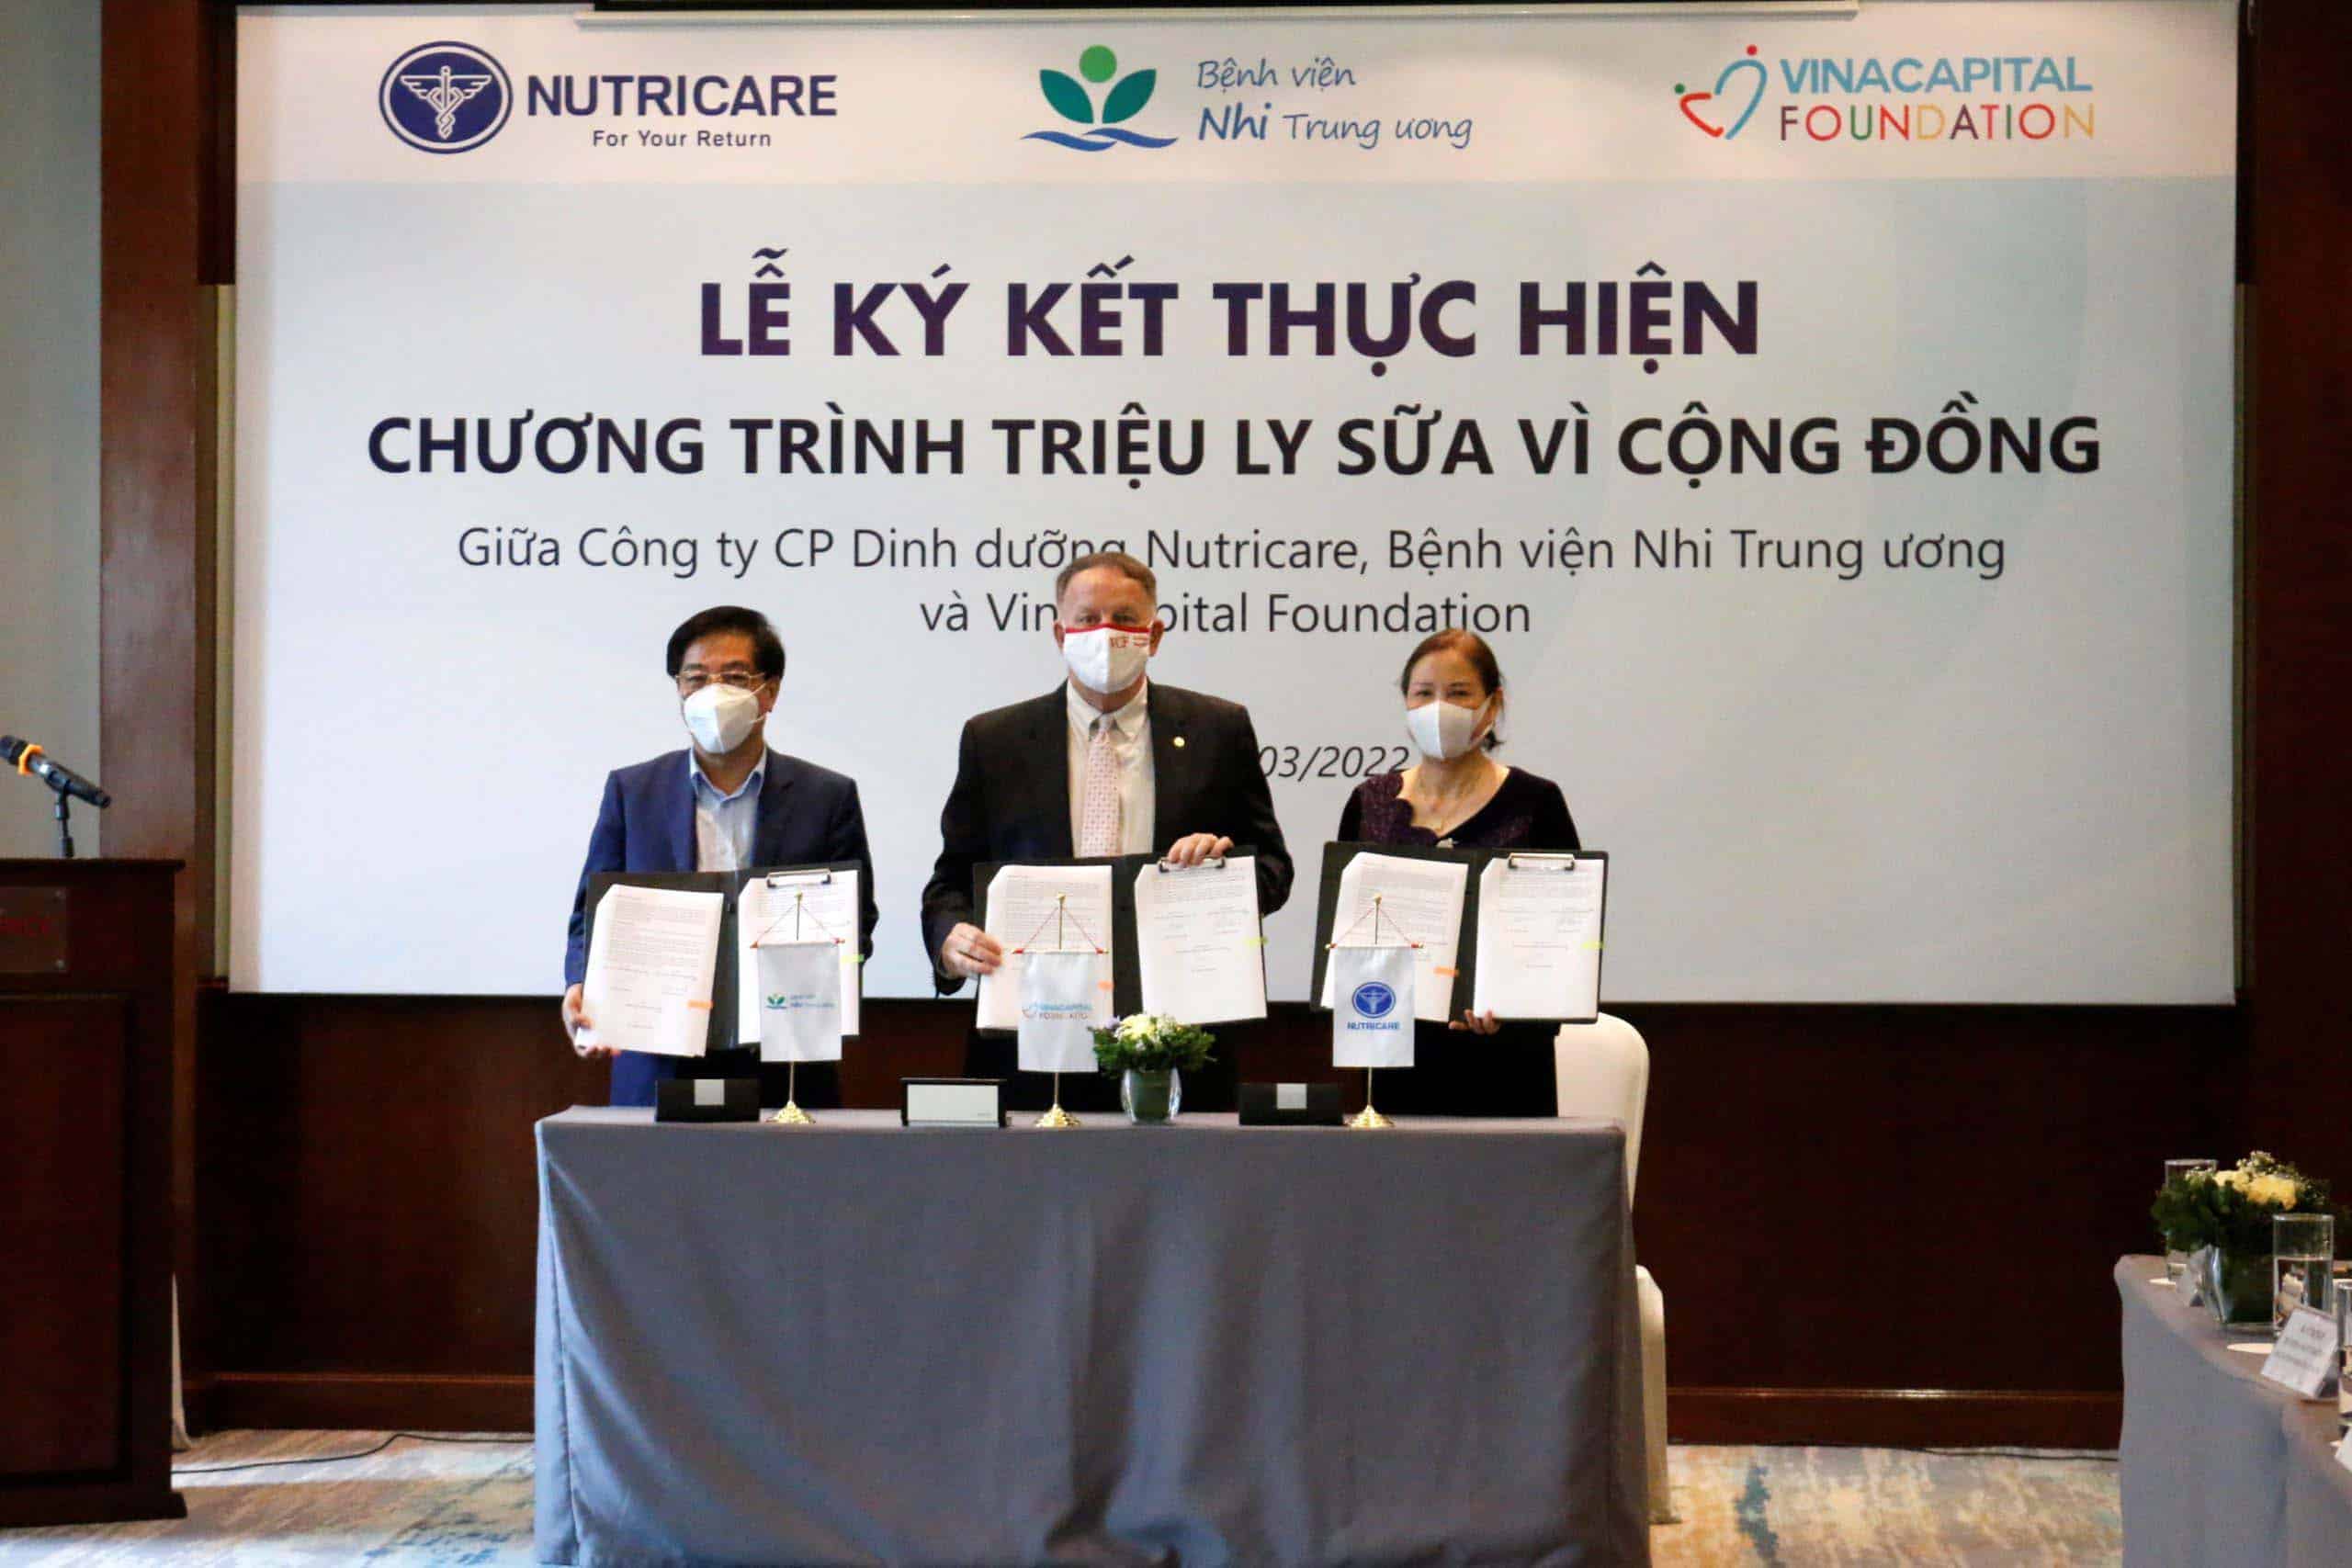 Implement the "Millions of glasses of milk for community" program in Vietnam National Children's Hospital and Ho Chi Minh City Children's Hospital 2 to support pediatric patients with cancer